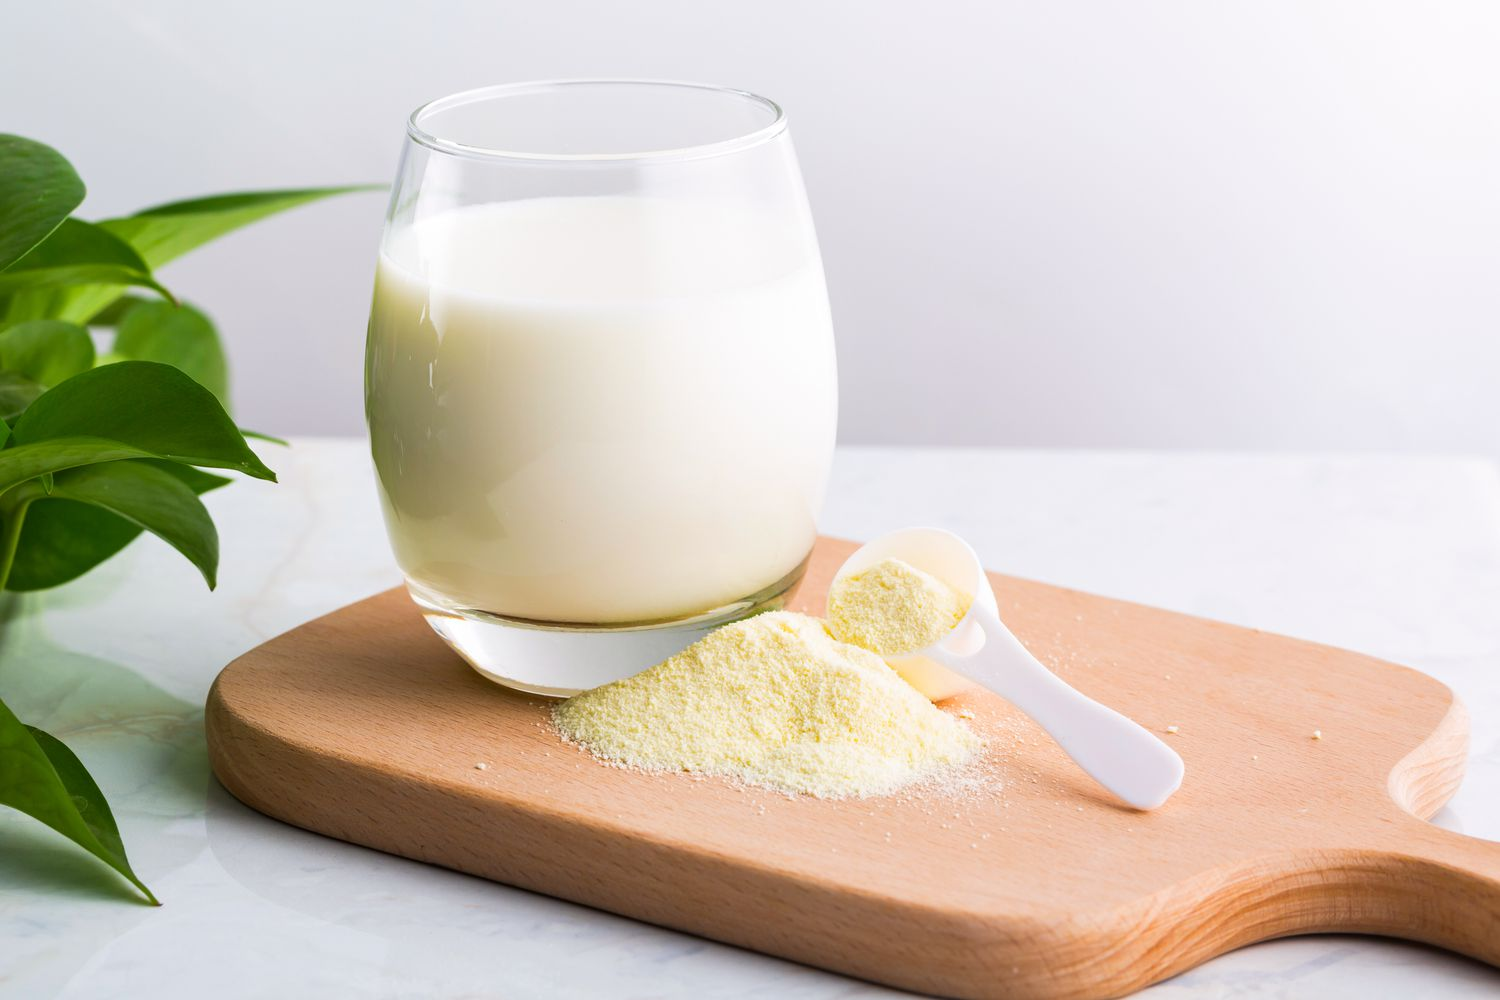 Powdered milk is one of the most popular types of milk today